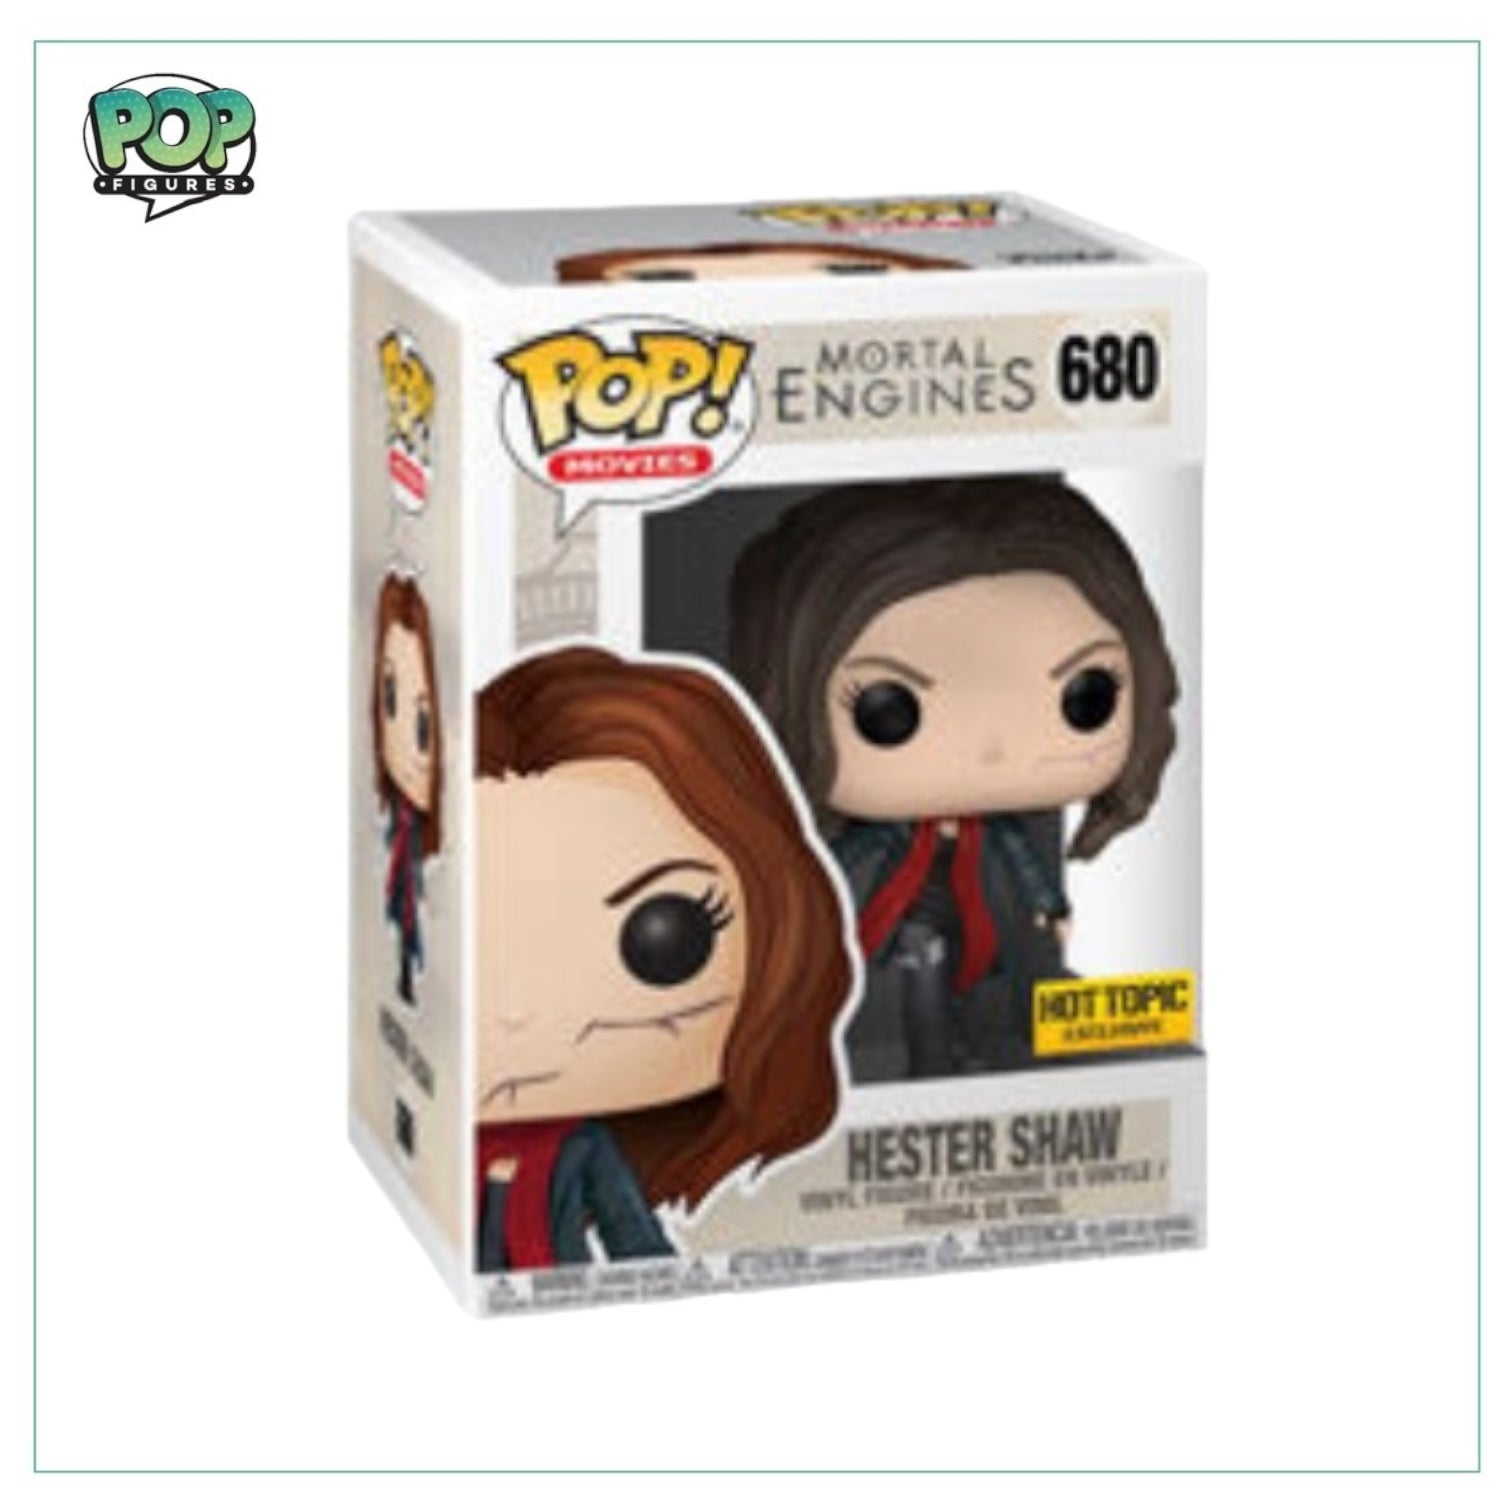 Hester Shaw #680 Funko Pop! - Mortal Engines - Hot Topic Exclusive